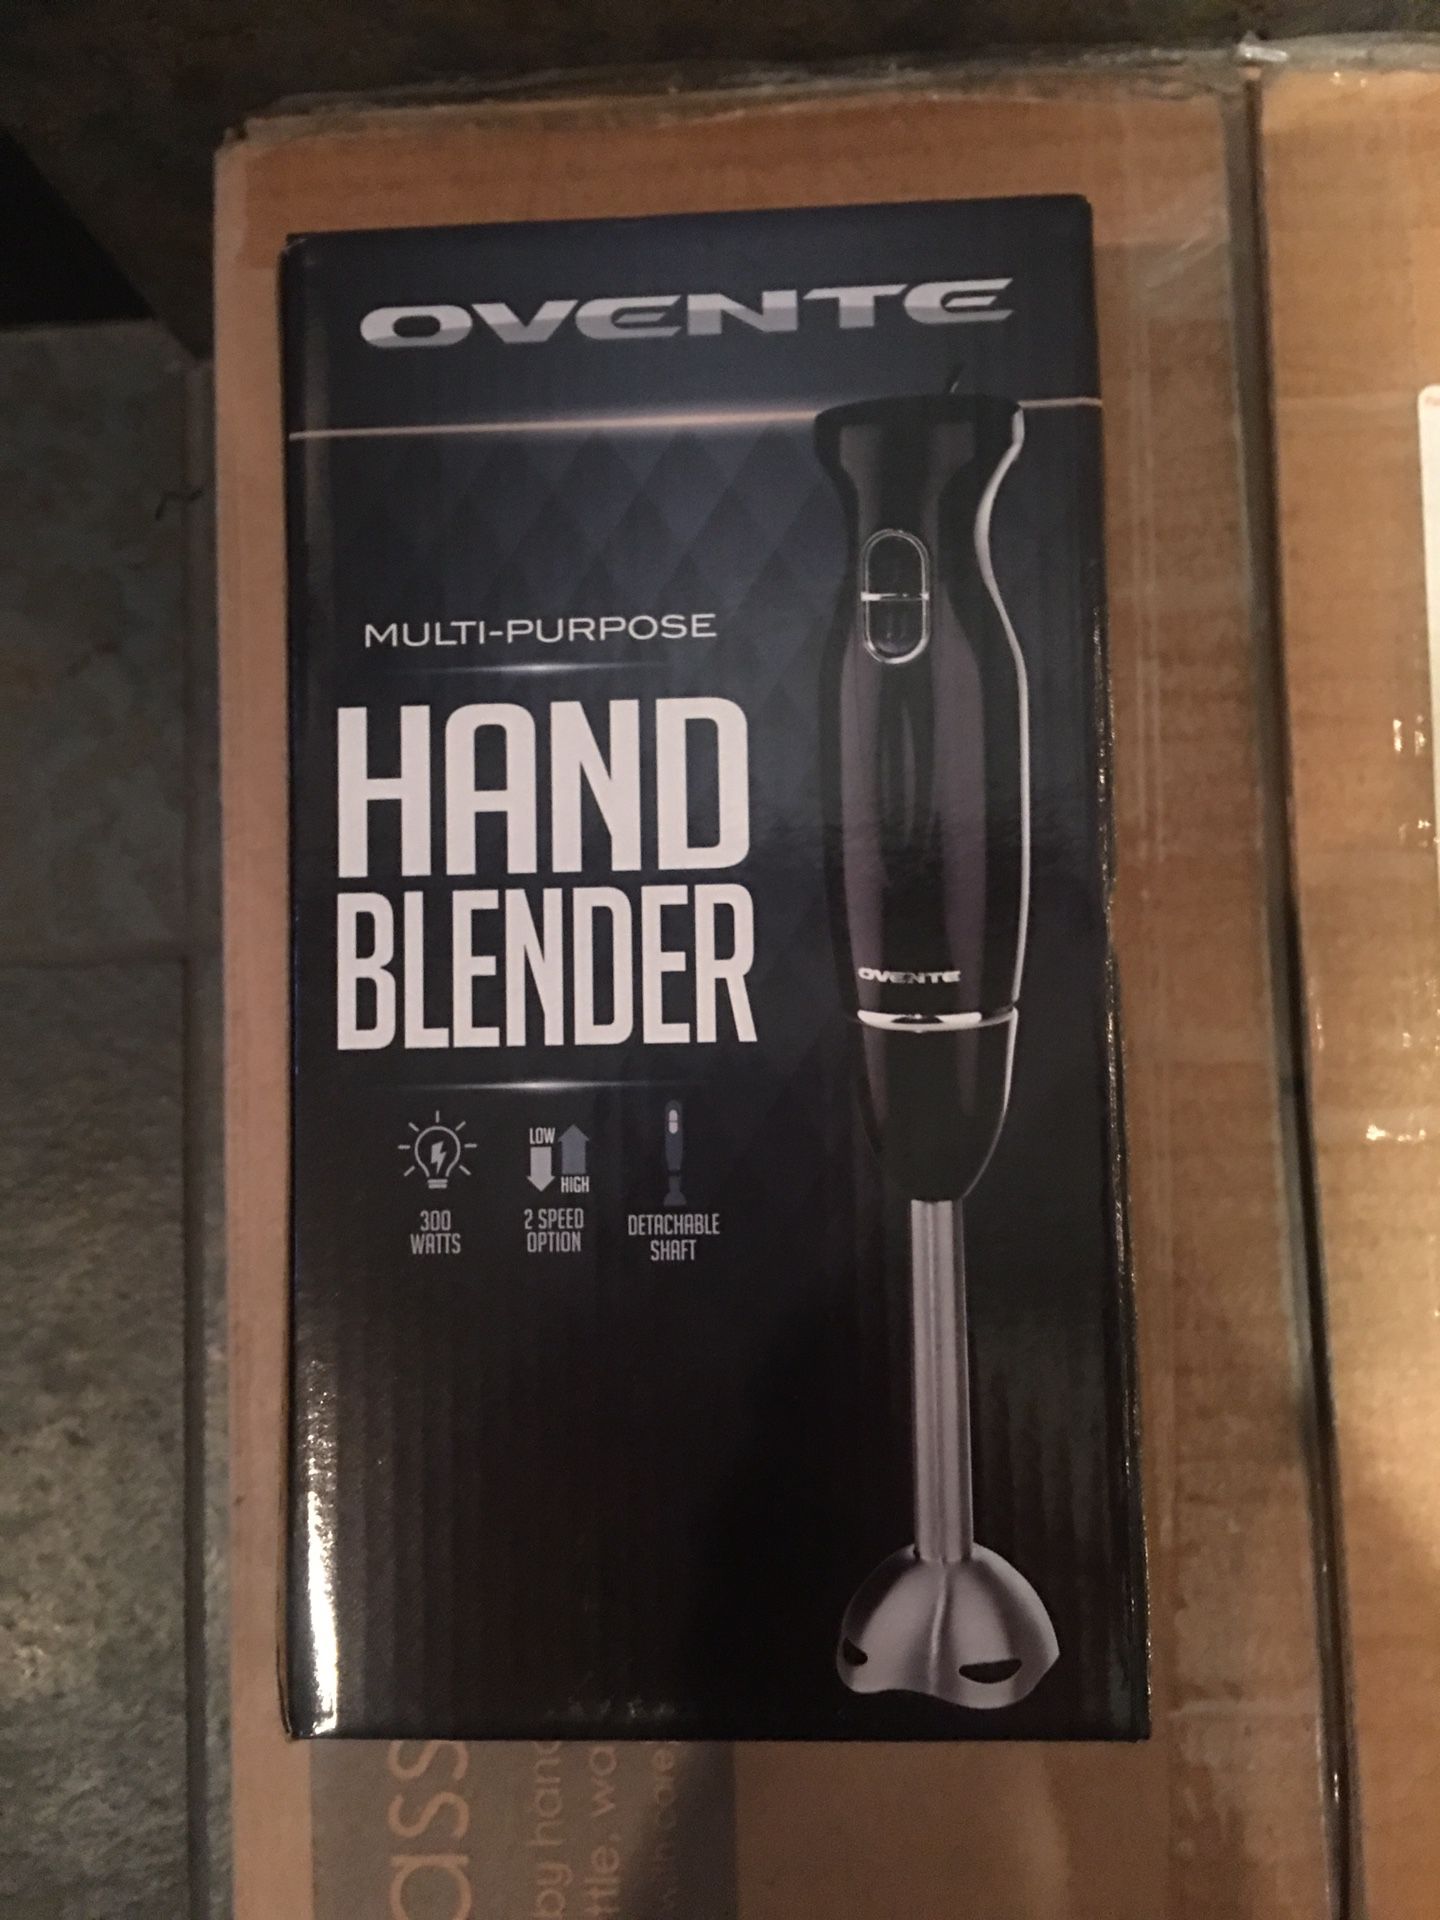 Brand new stick-style hand blender. Never used. Great Christmas gift!